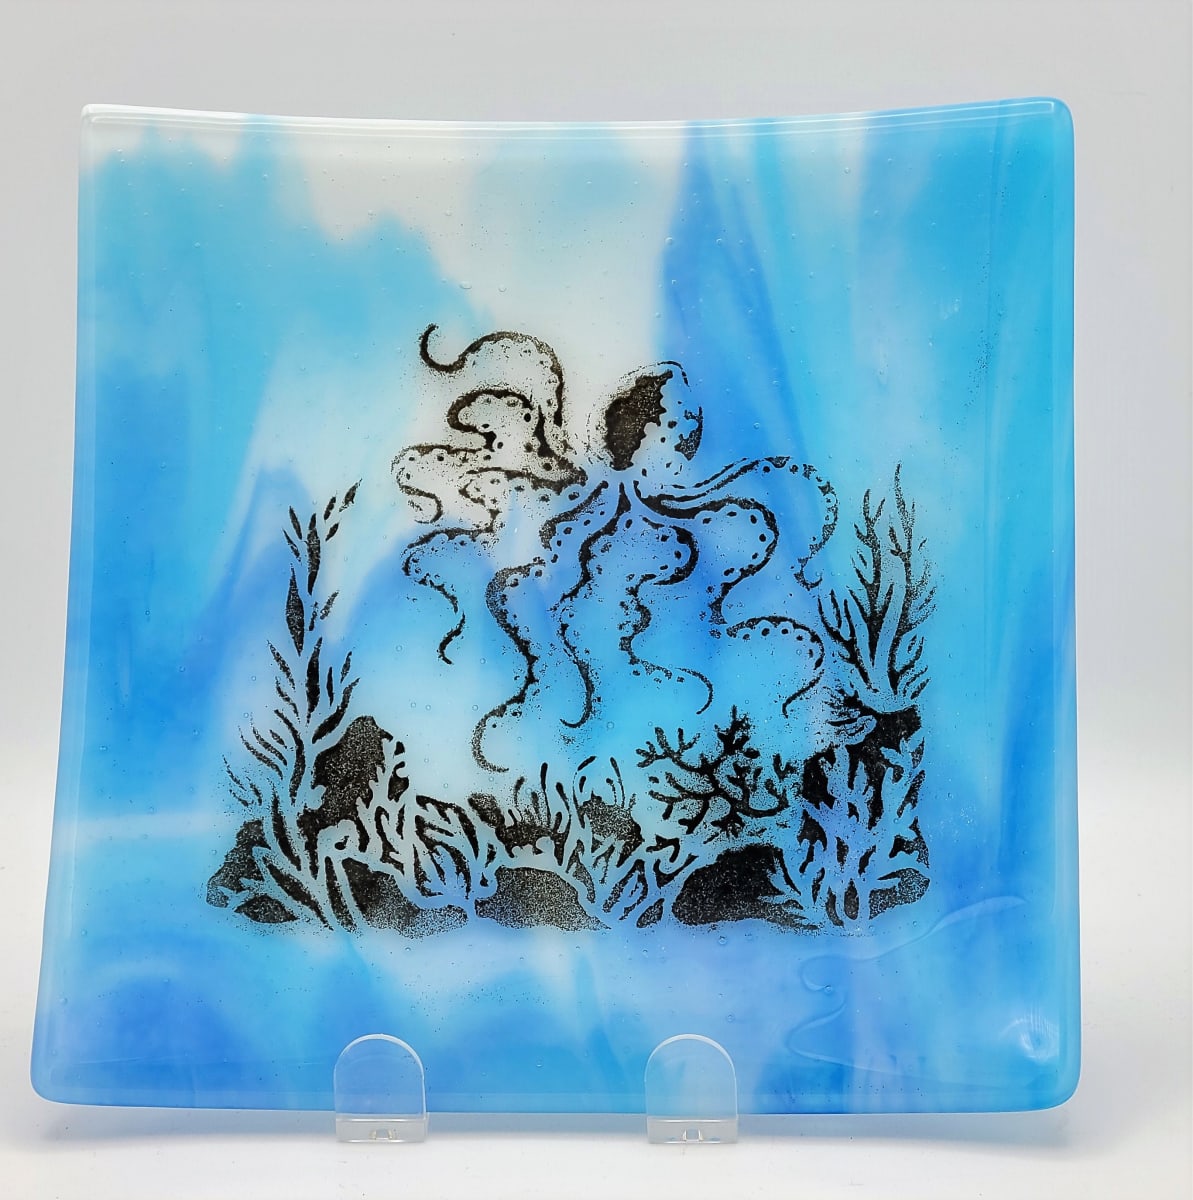 Sushi Plate with Octopus Scene on Blue/White Streaky 